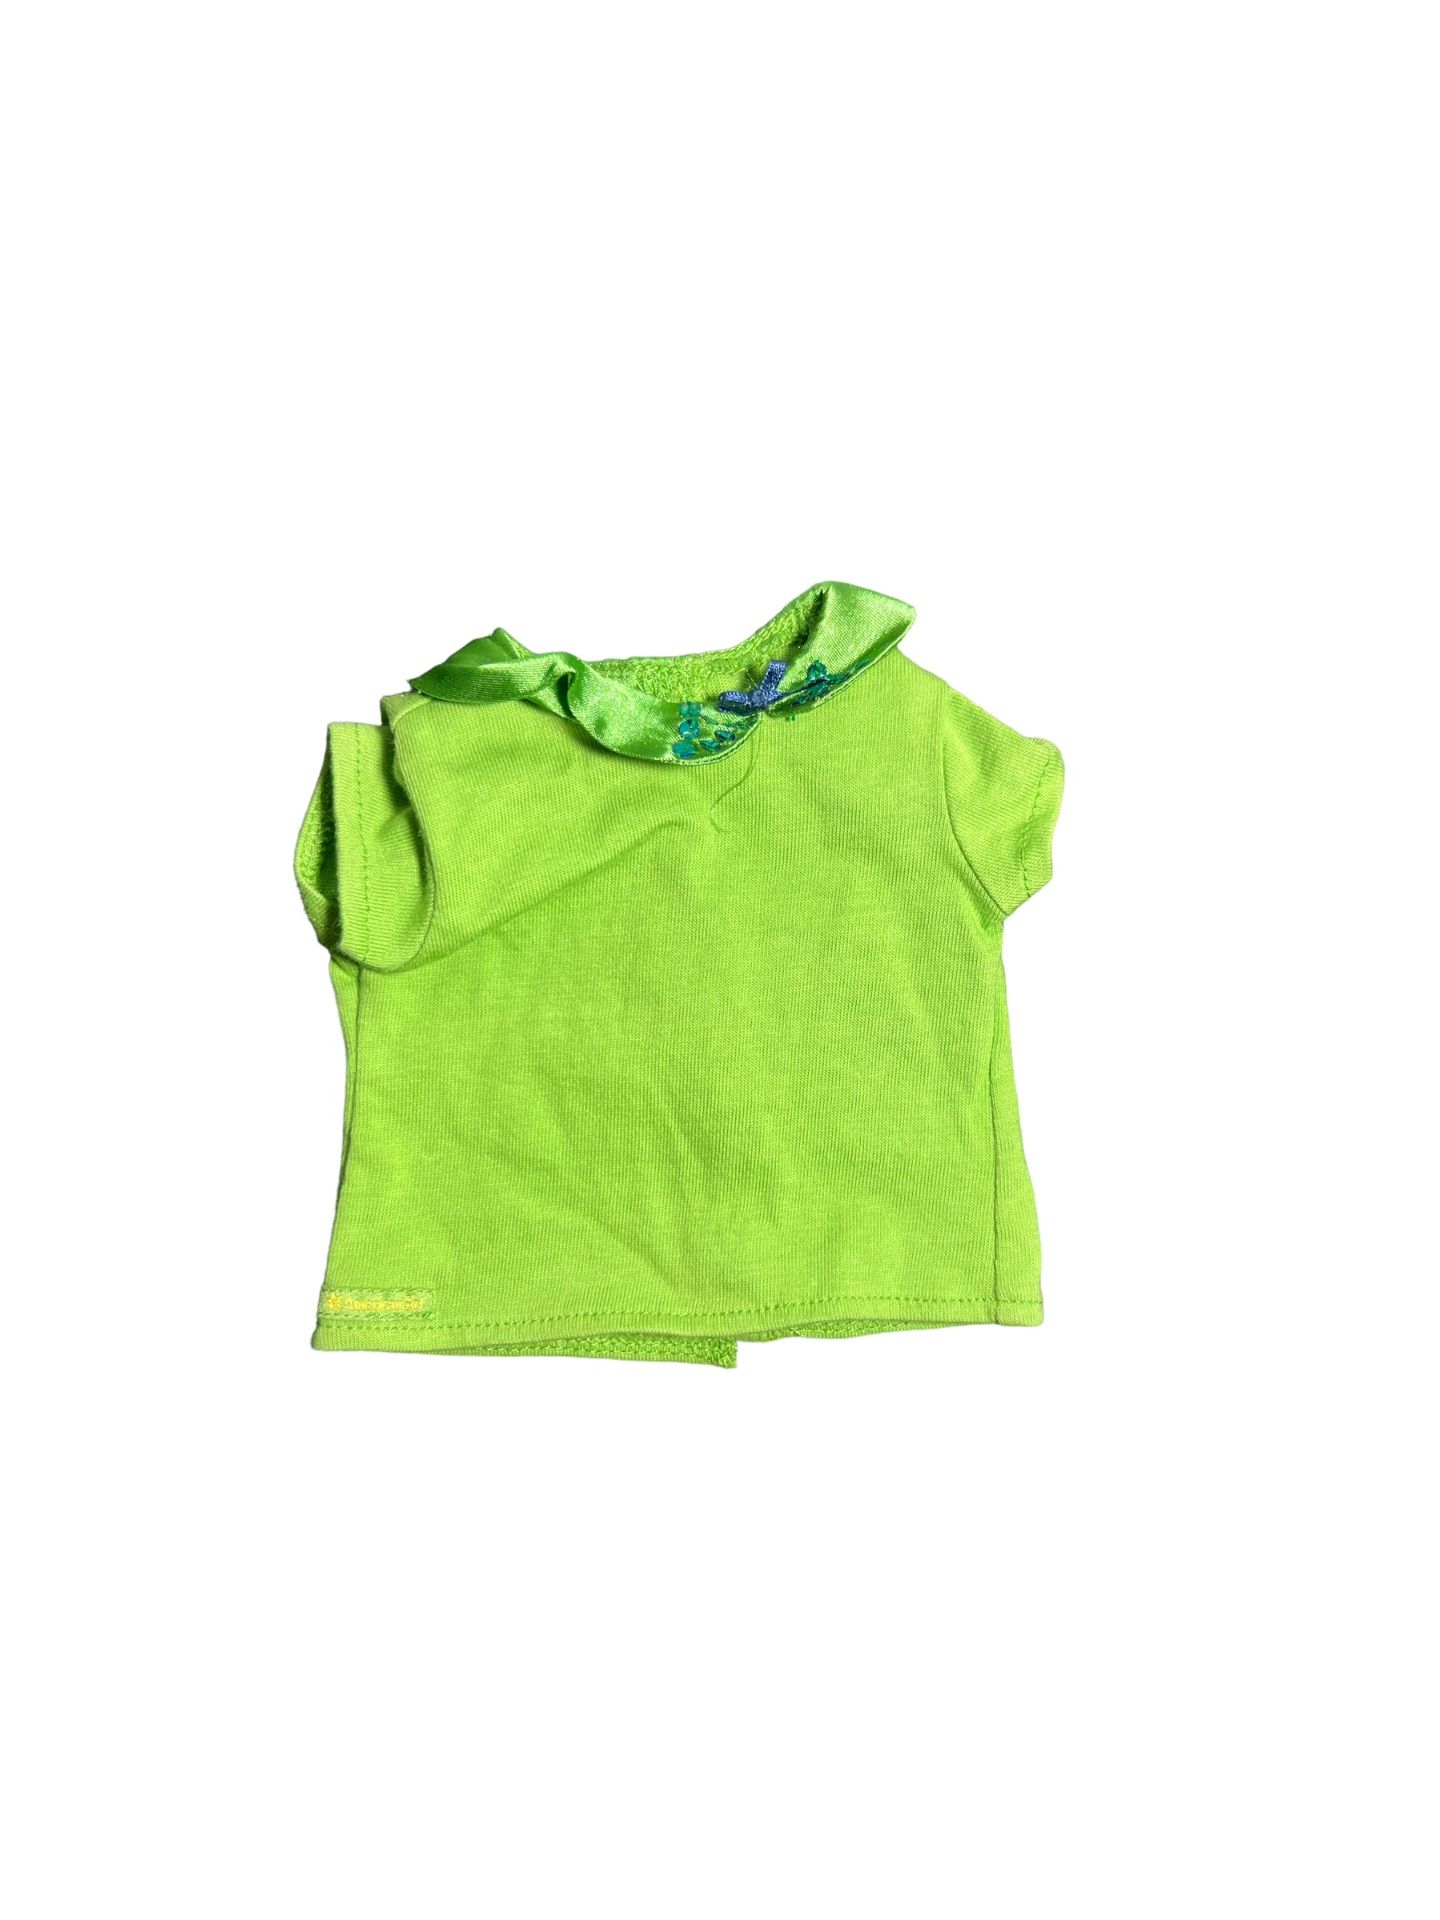 American Girl School Day Outfit Green Top Shirt ONLY